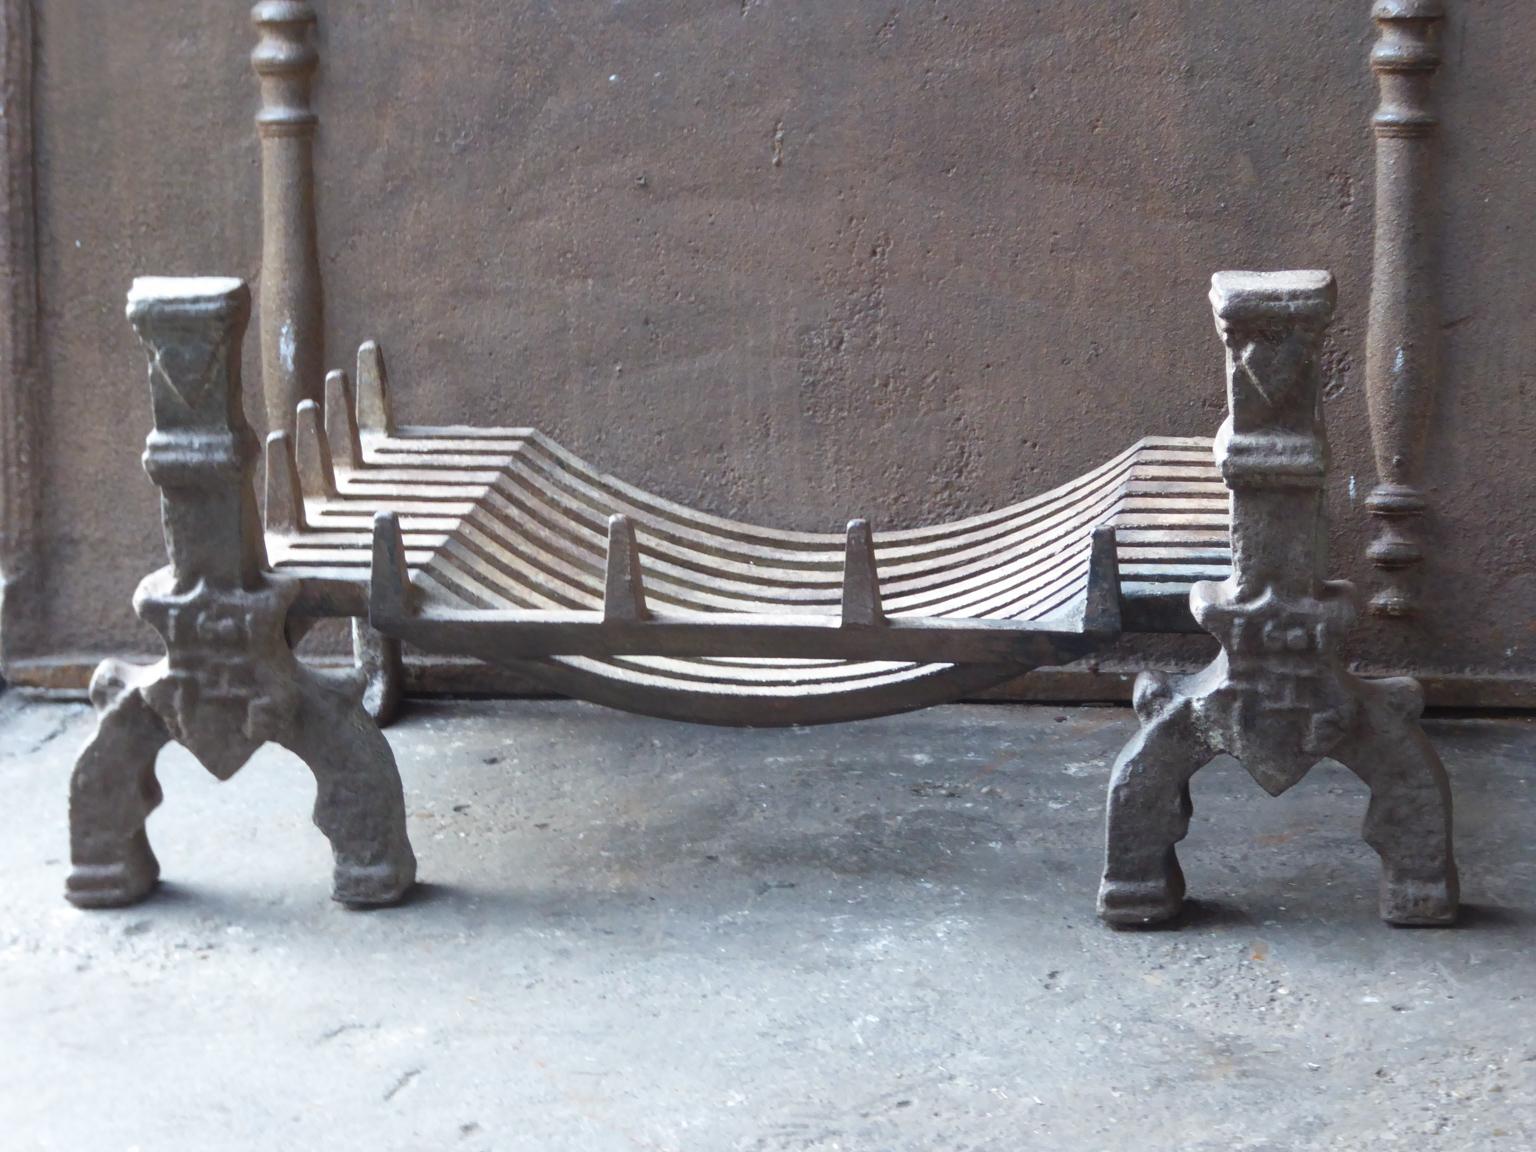 English neo gothic fireplace style basket or fire basket. The fireplace grate is made of cast iron. The total width of the front of the fireplace grate is 32 inch (81 cm).

















 